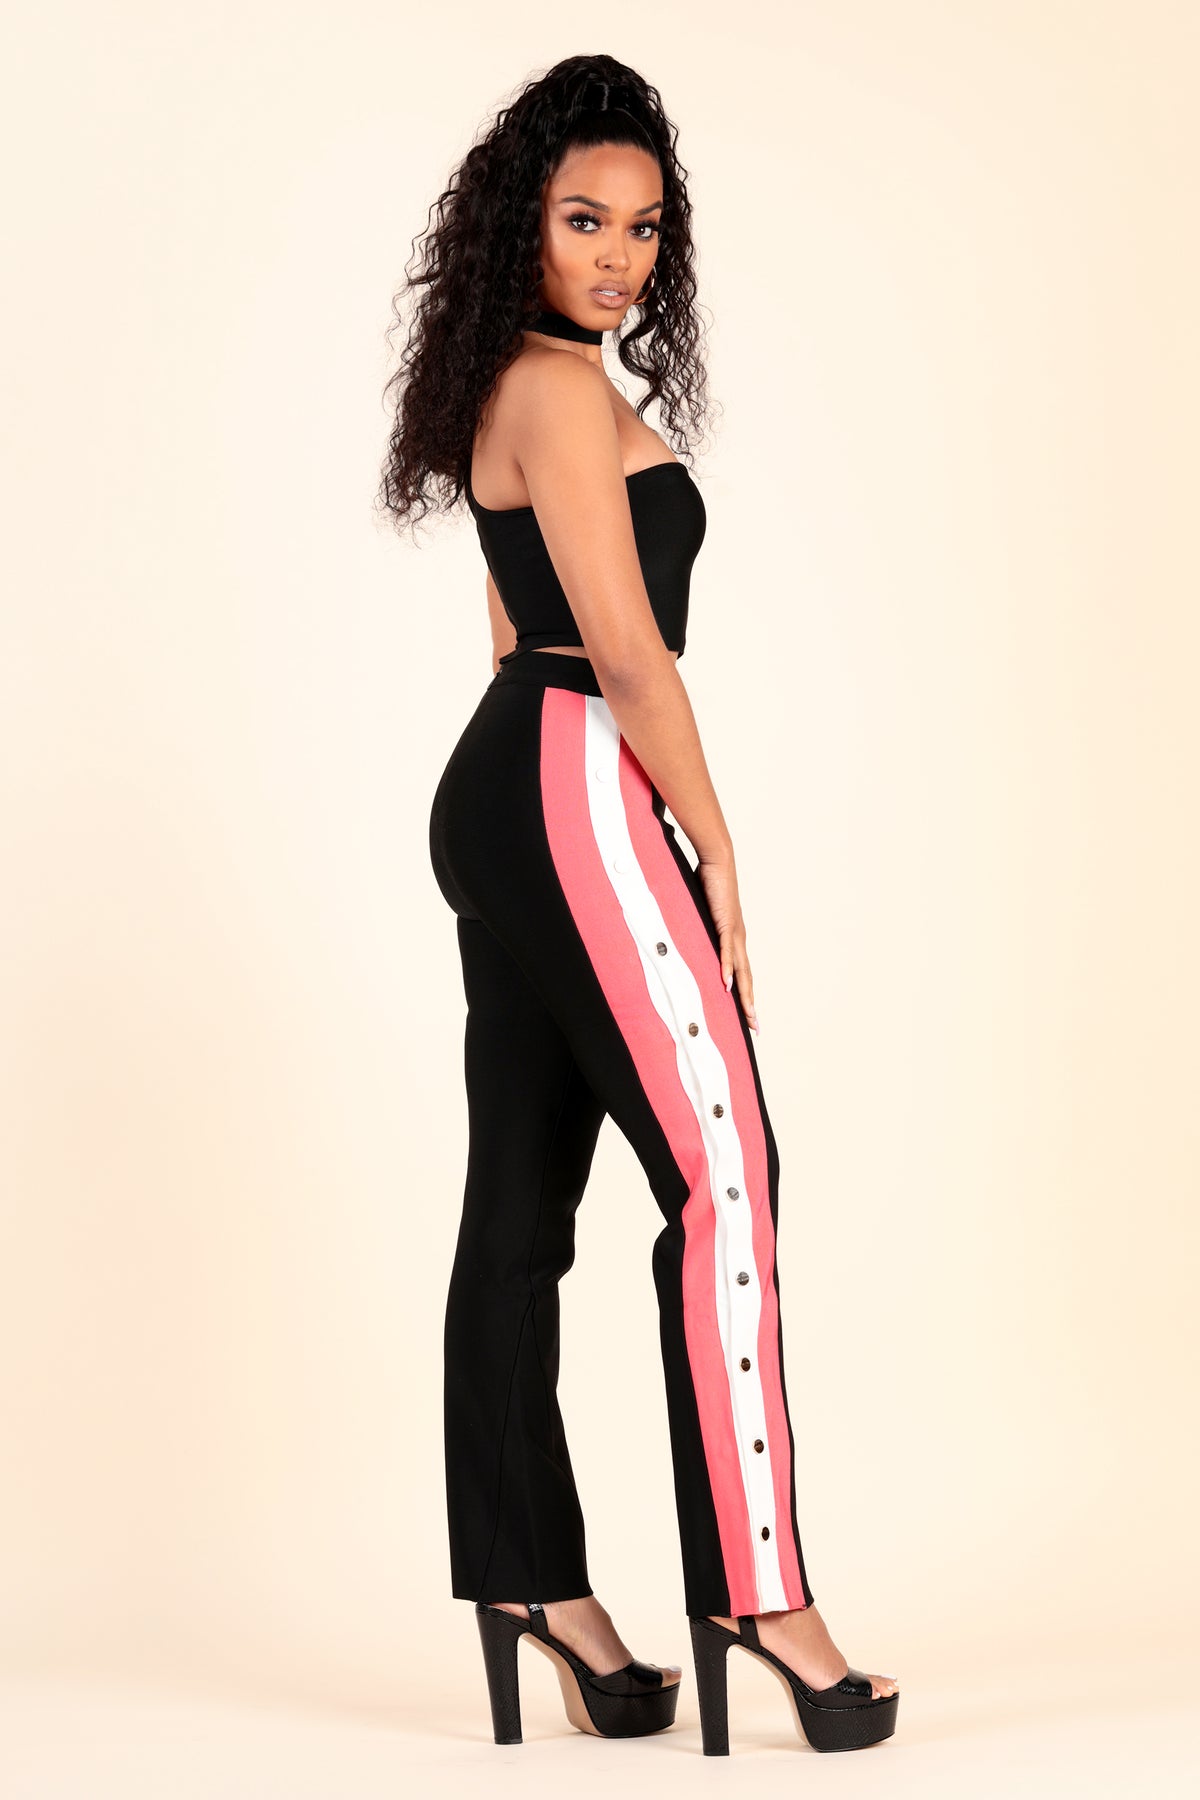 lustruck choker tube top flare striped pant gold snap buttons two piece black cloral white day party night clubbing girls ladies event sporty bandage bodycon fashionnova prettylittlething house of cb missguided forever 21 bebe 